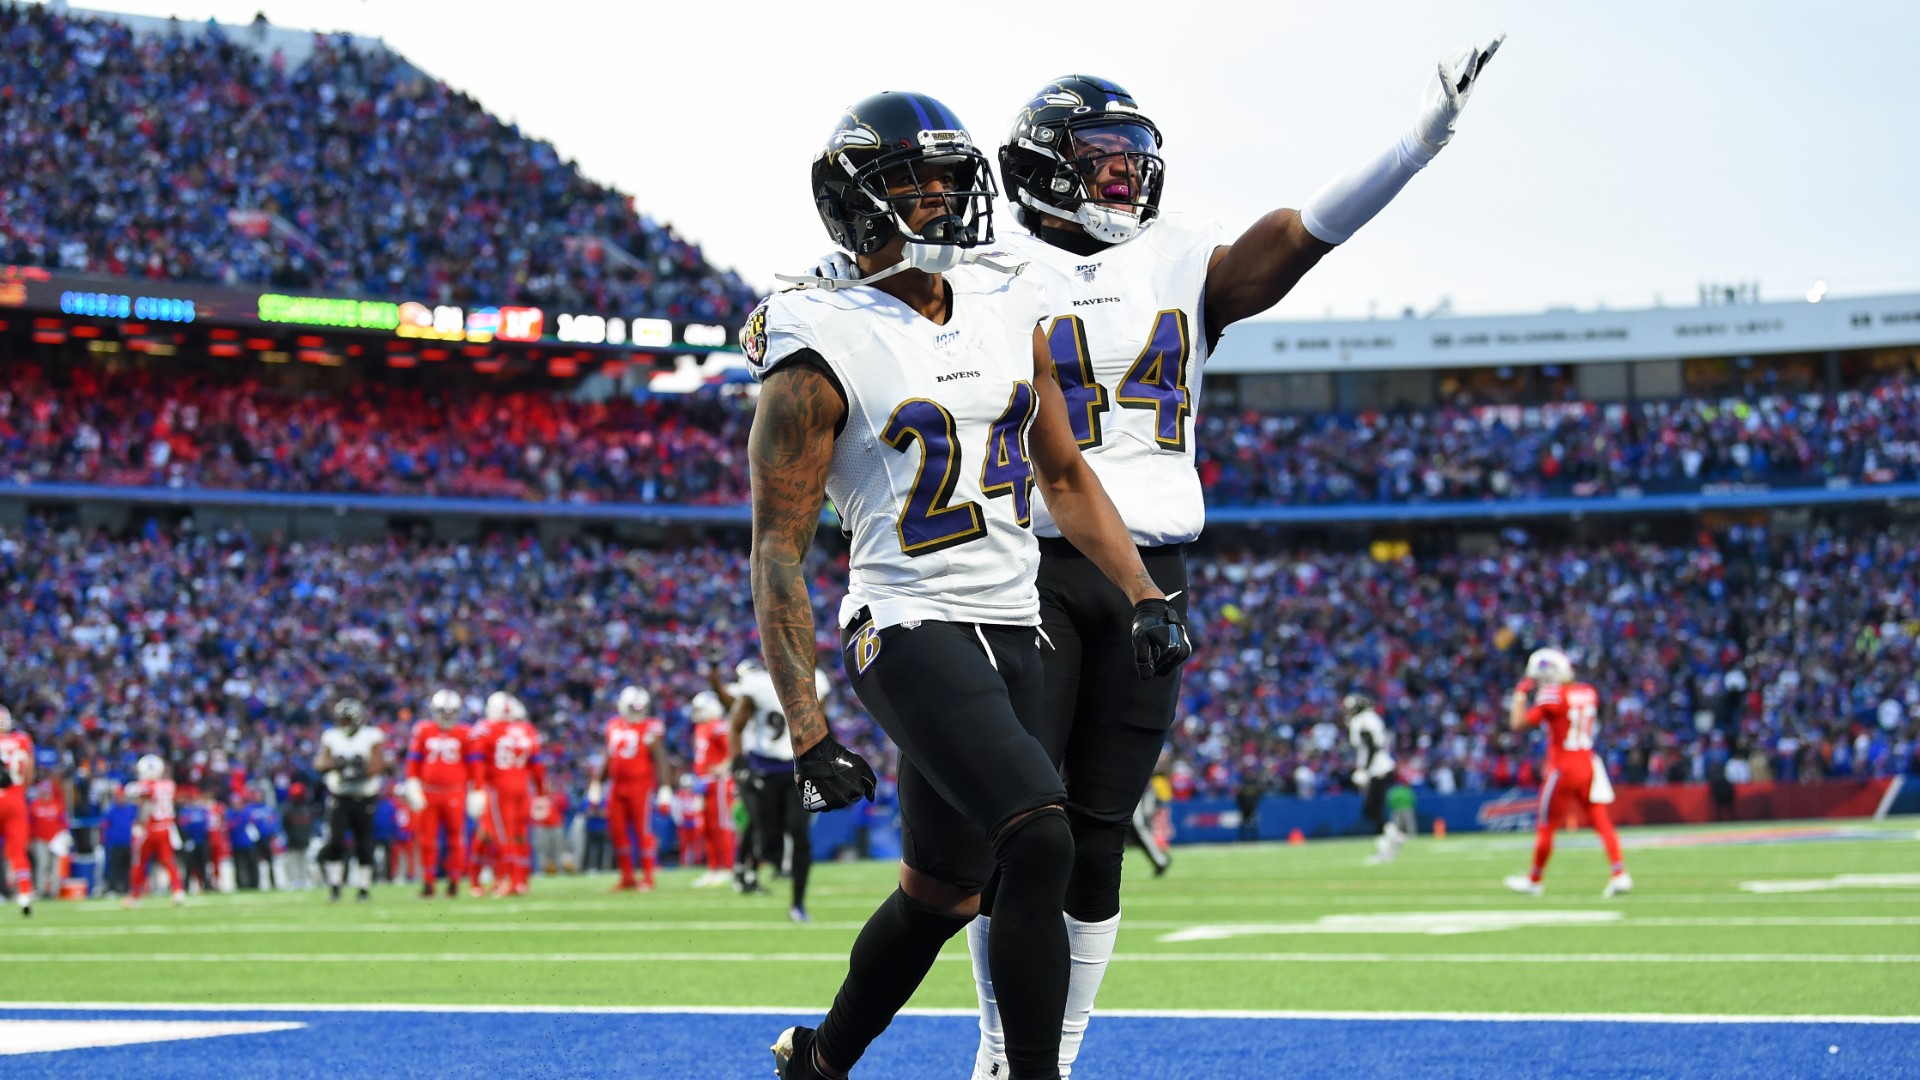 With Peters and Humphrey, the Ravens Likely Have the NFL's Top Cornerback Duo